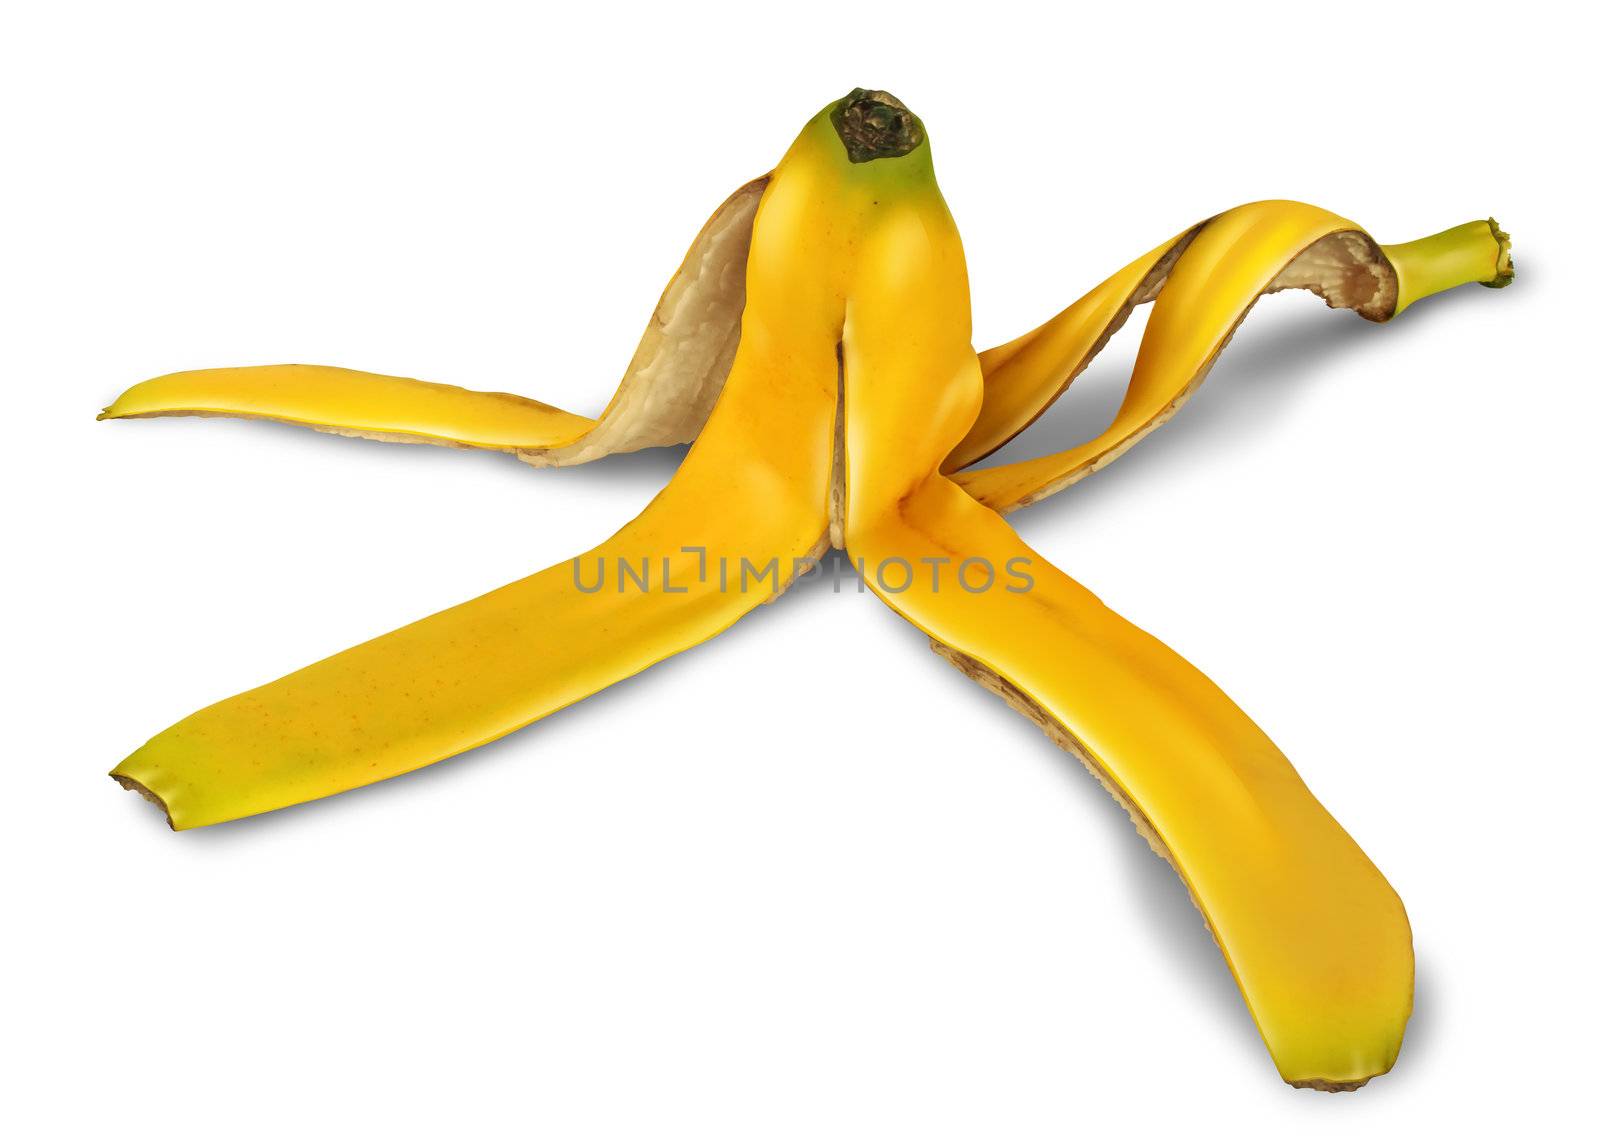 Banana peel on a white background with a shadow as a symbol of danger and risk of slipping on the yellow tropical fruit and an icon of natural garbage discarded for composting and recycling.